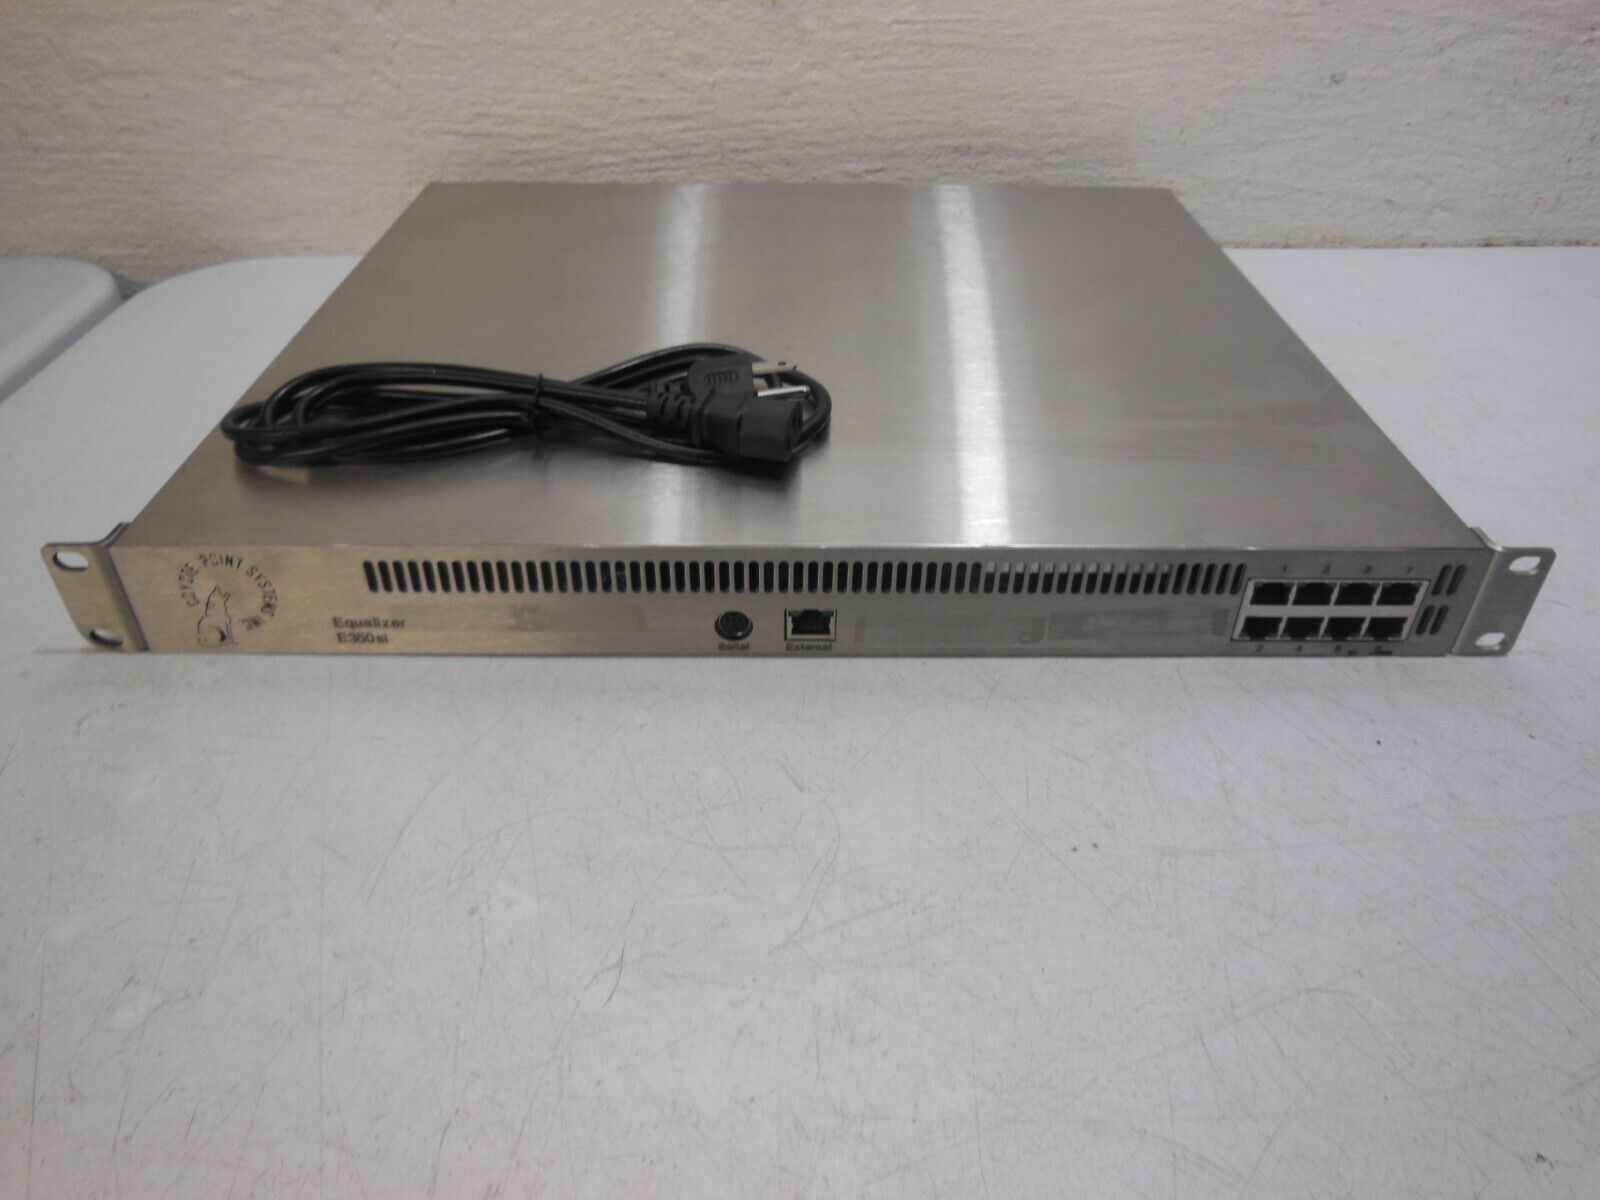 Coyote Point Systems Inc. Equalizer E350si Load Balancer